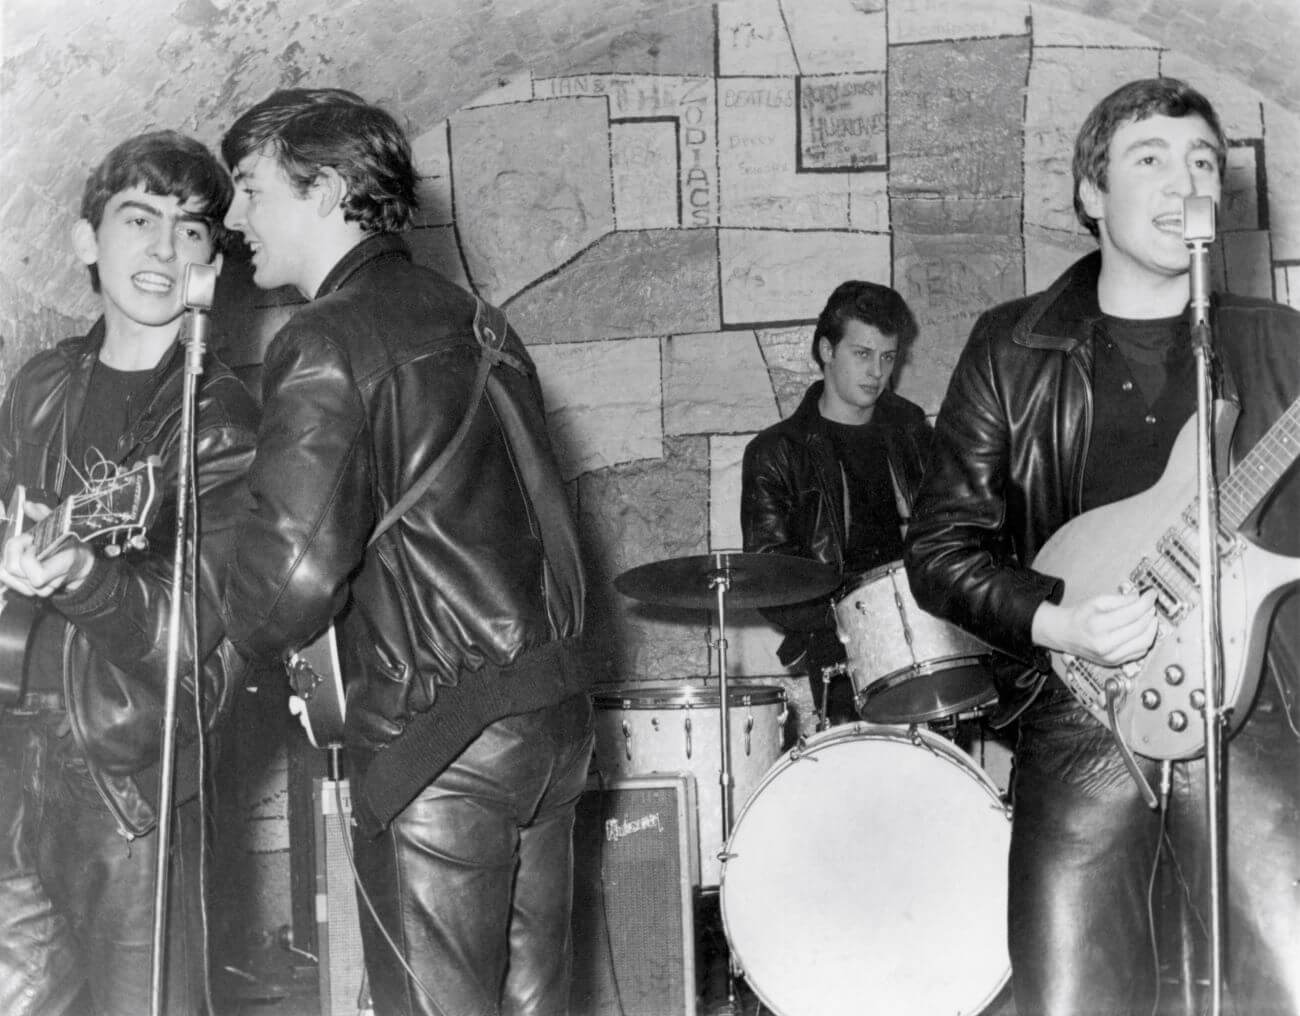 A black and white picture of George Harrison and Paul McCartney playing guitars and singing into a microphone. John Lennon sings into a separate microphone and plays guitar. Pete Best plays the drums behind them.